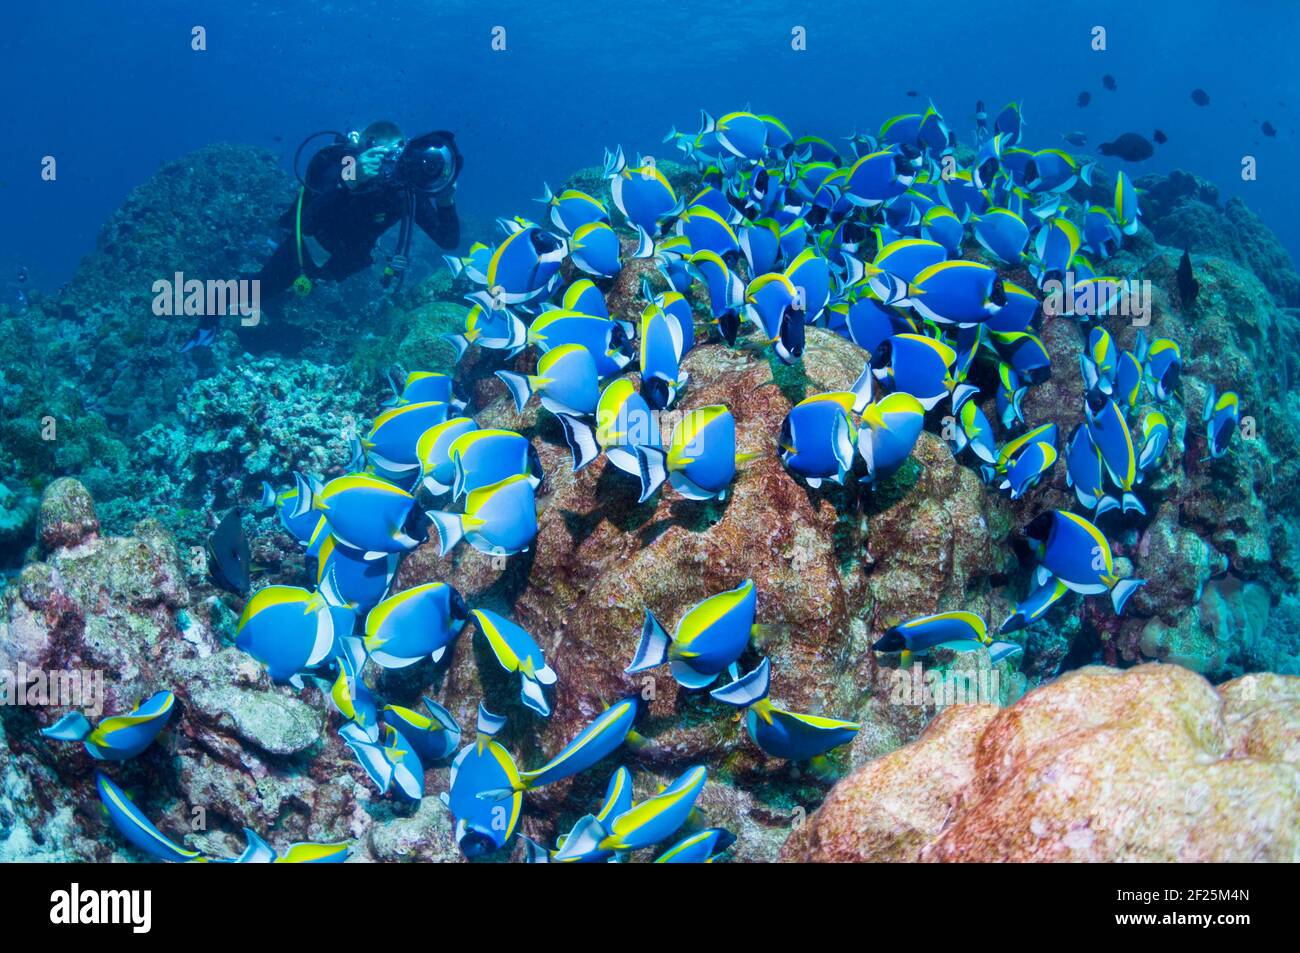 Large school of Powderblue surgeonfish (Acanthurus leucosternon) grazing on algae covered coral rock with a diver with a camera.  Andaman Sea, Thailan Stock Photo